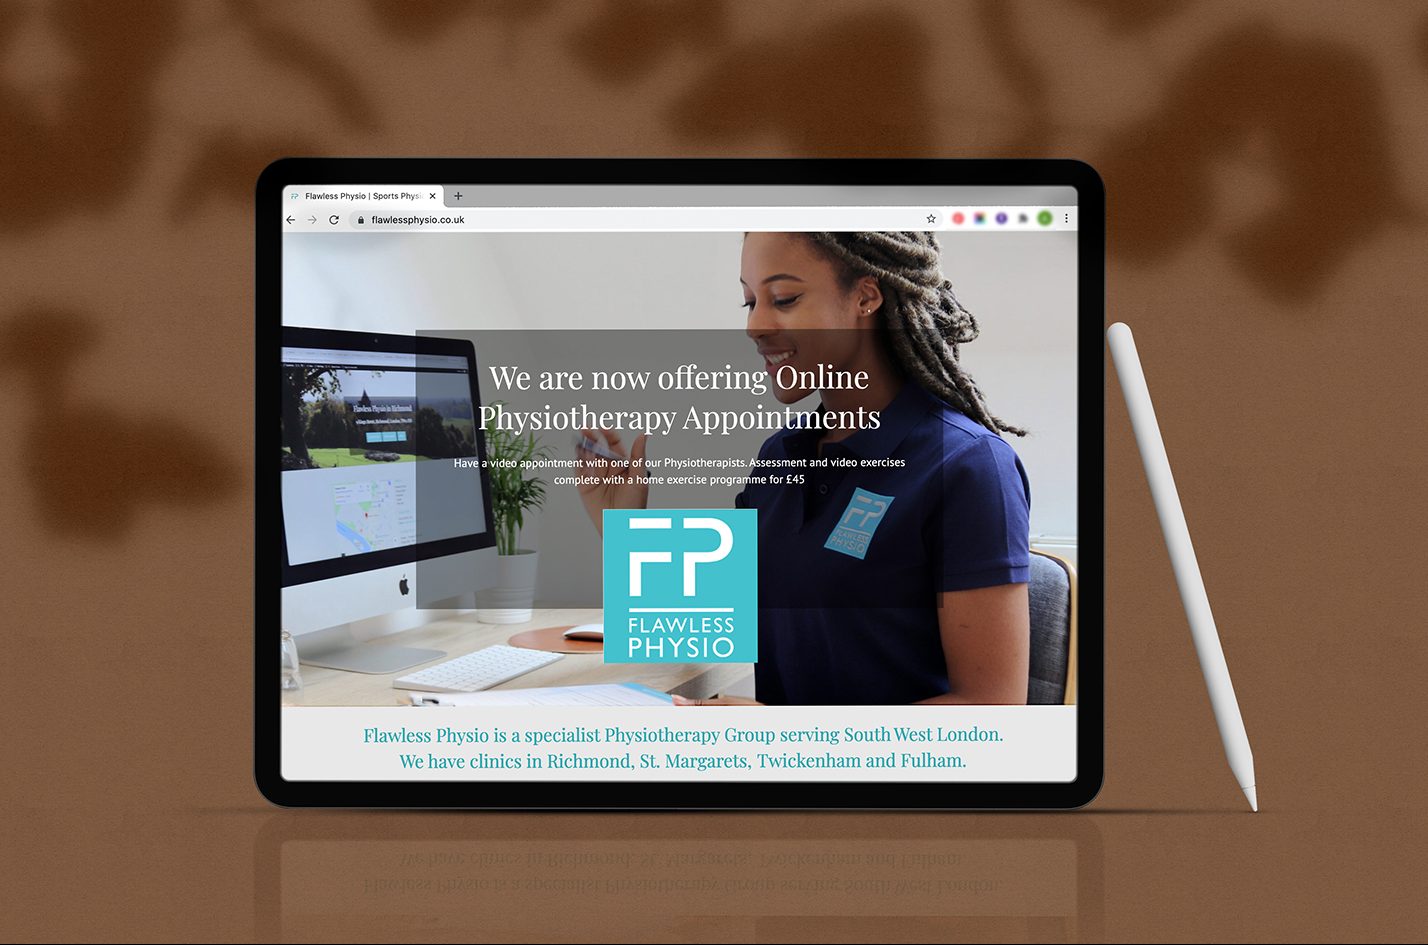 Sample of client Flawless Physio's website on tablet